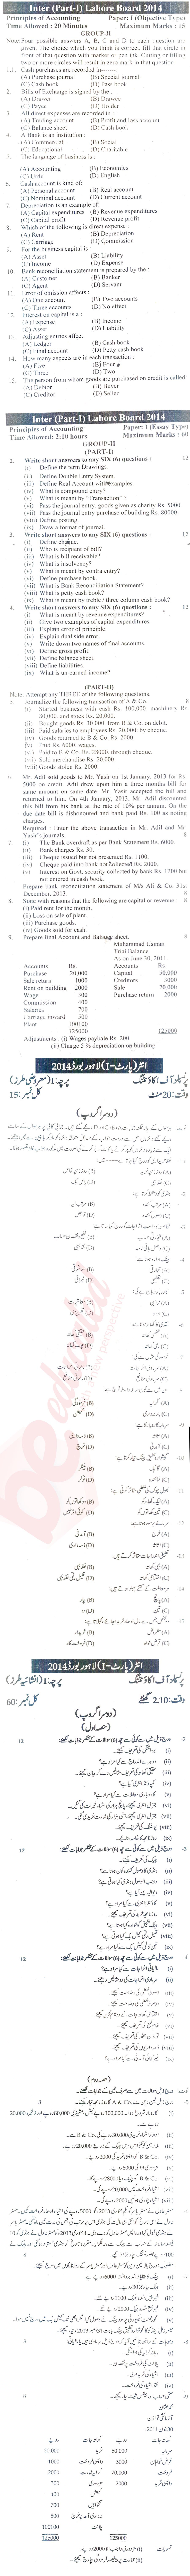 Principles of Accounting ICOM Part 1 Past Paper Group 2 BISE Lahore 2014